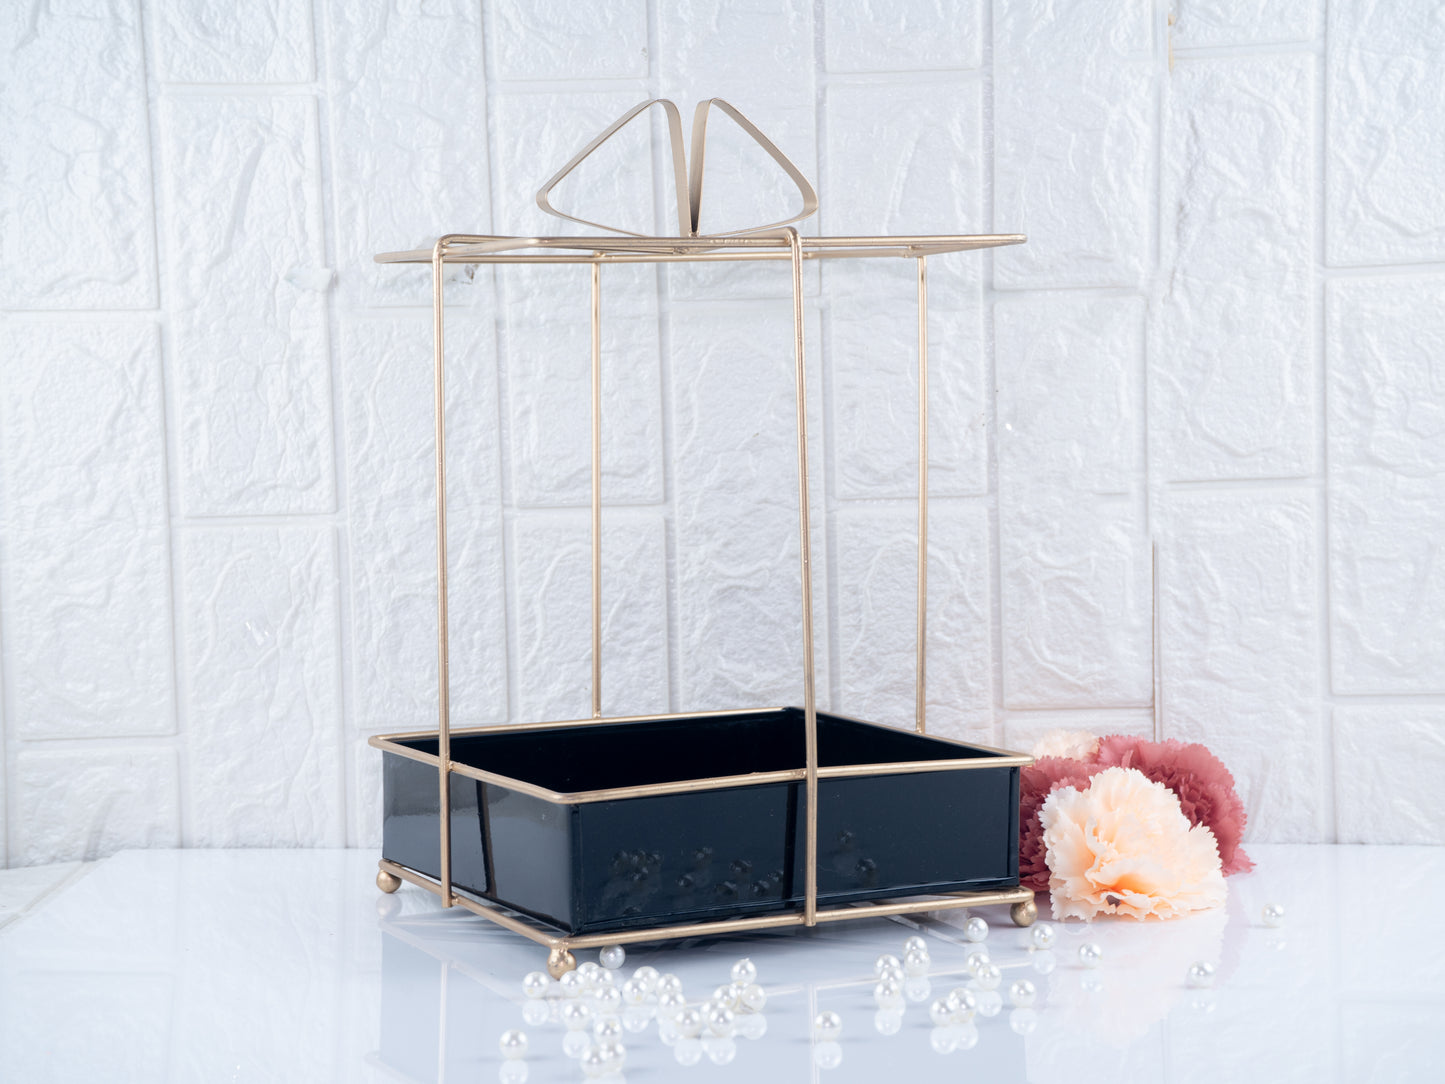 Cage hamper with black tray